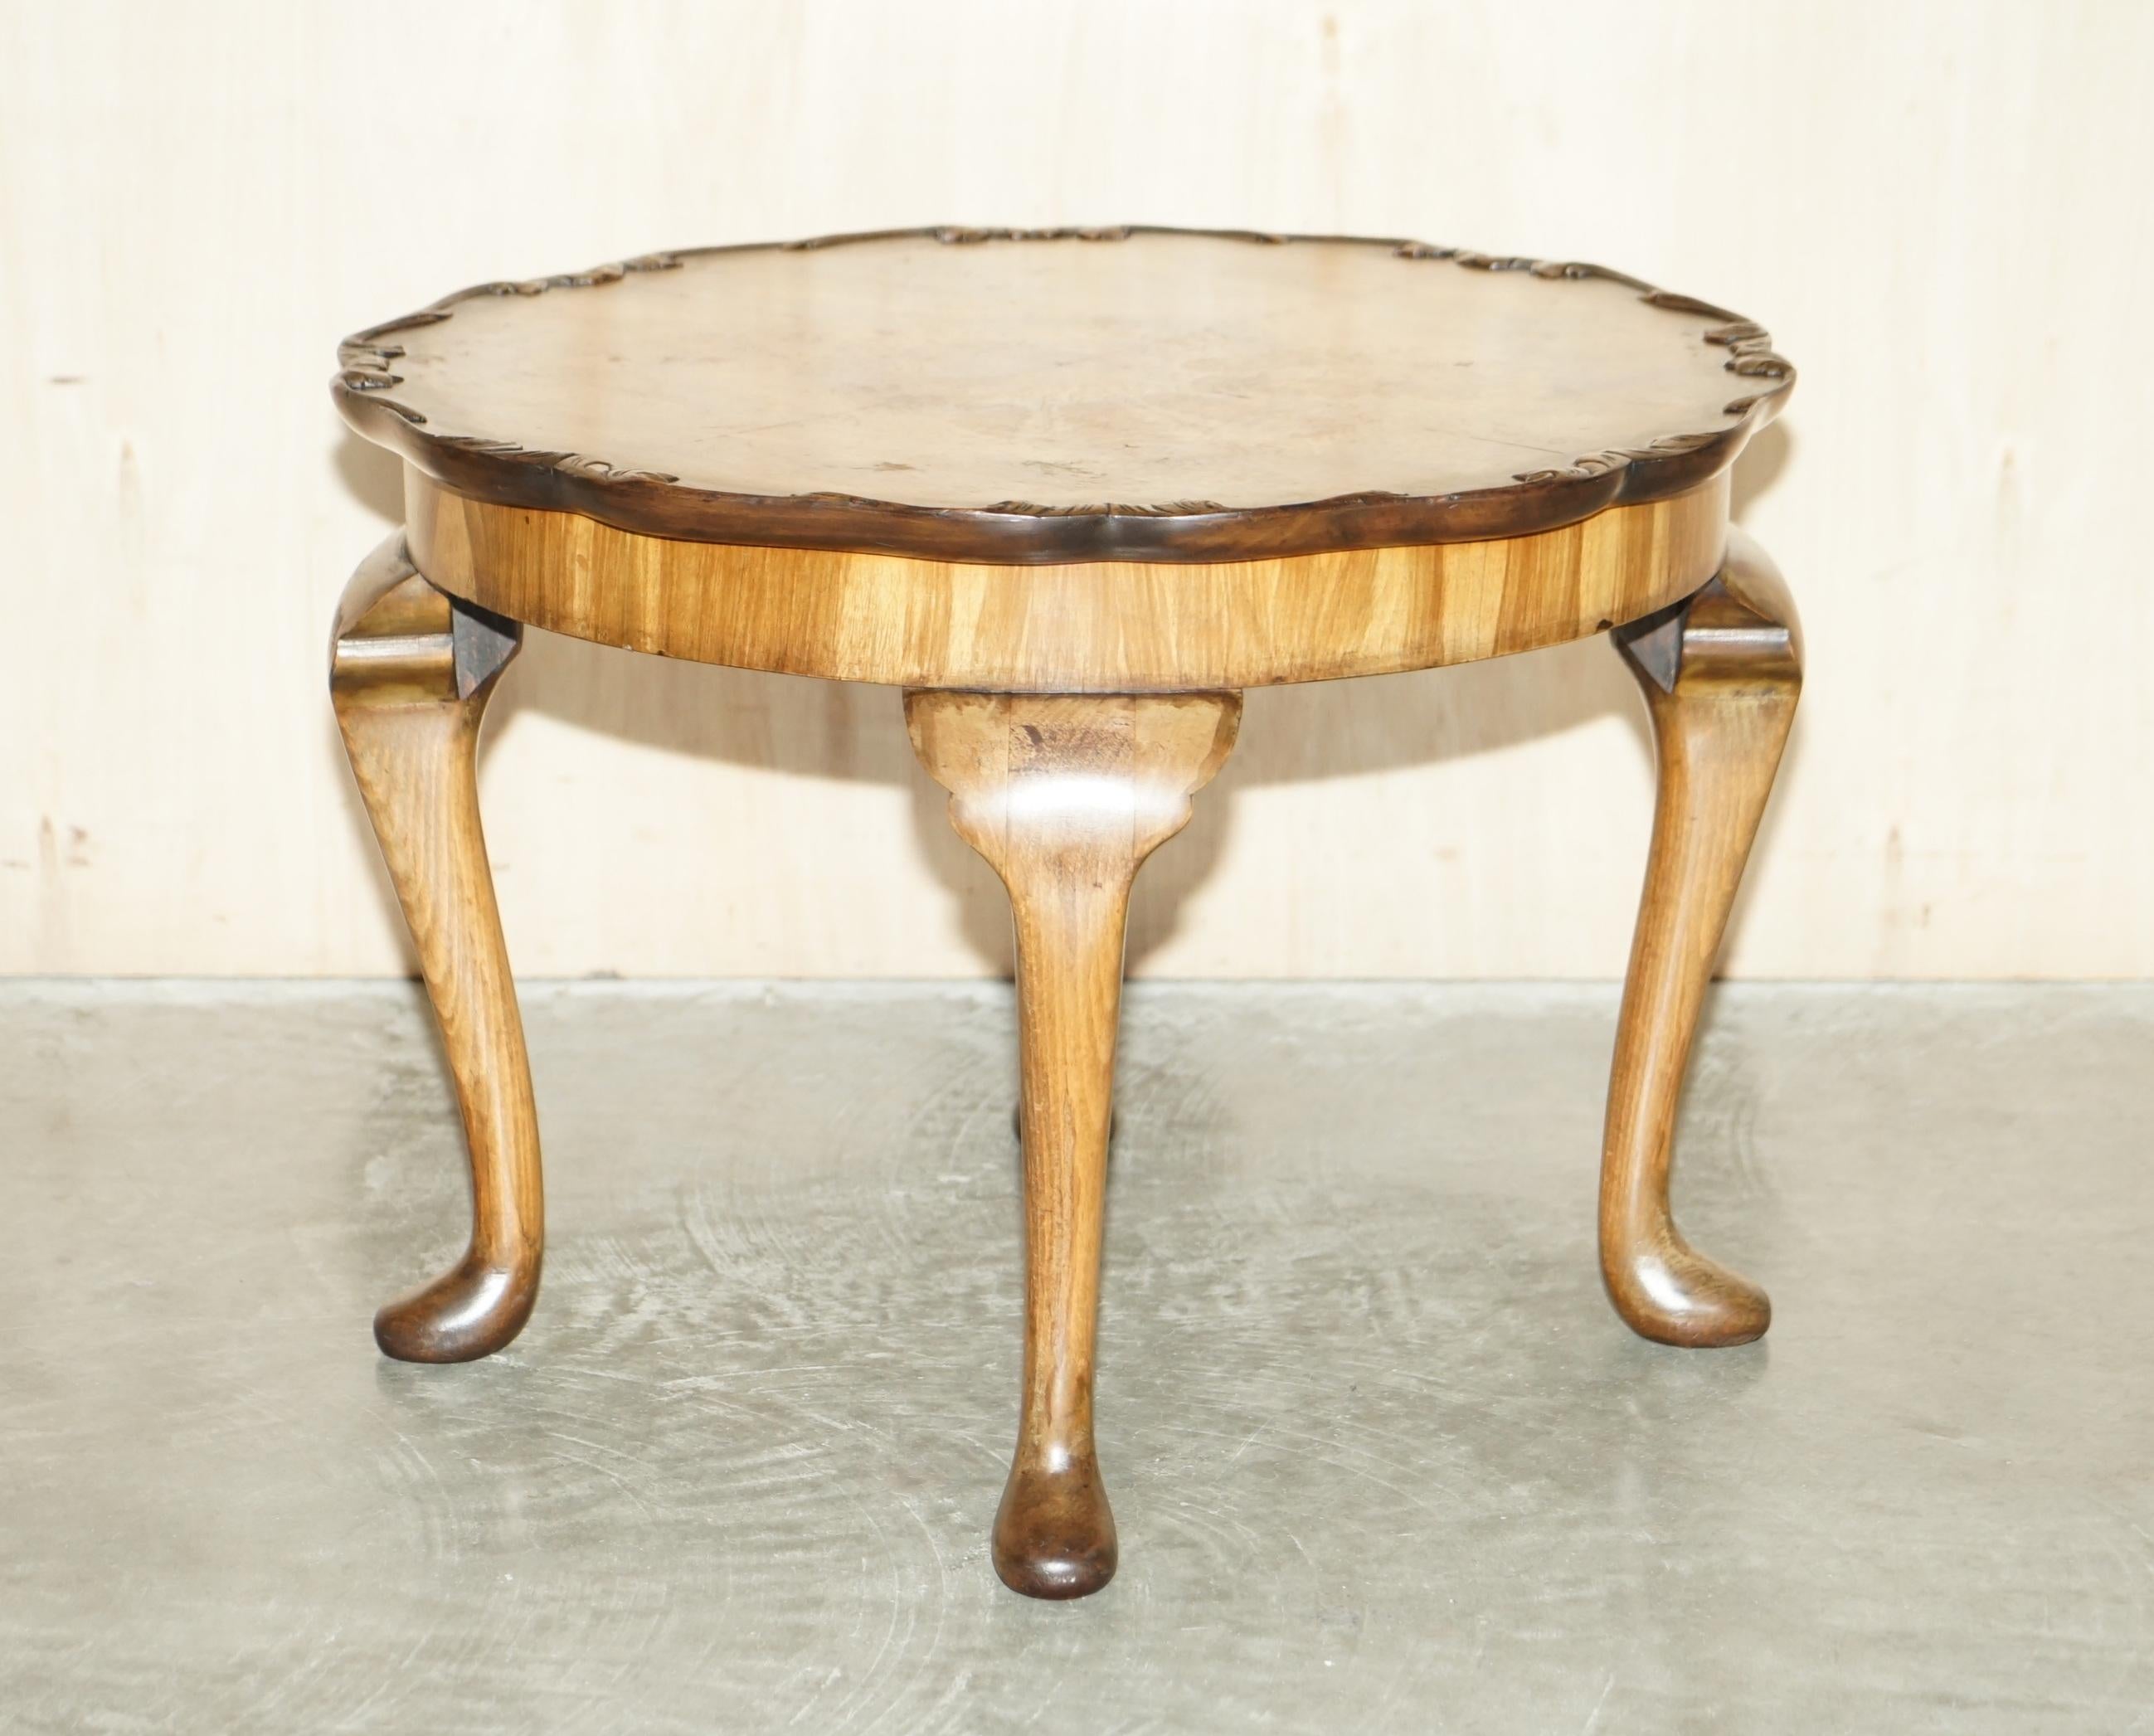 We are delighted to offer for sale this stunning hand made in England, quarter cut and burr walnut coffee table with stunning carvings to the top 

A good looking, well made and decorative coffee table with some of the nicest carvings I have ever